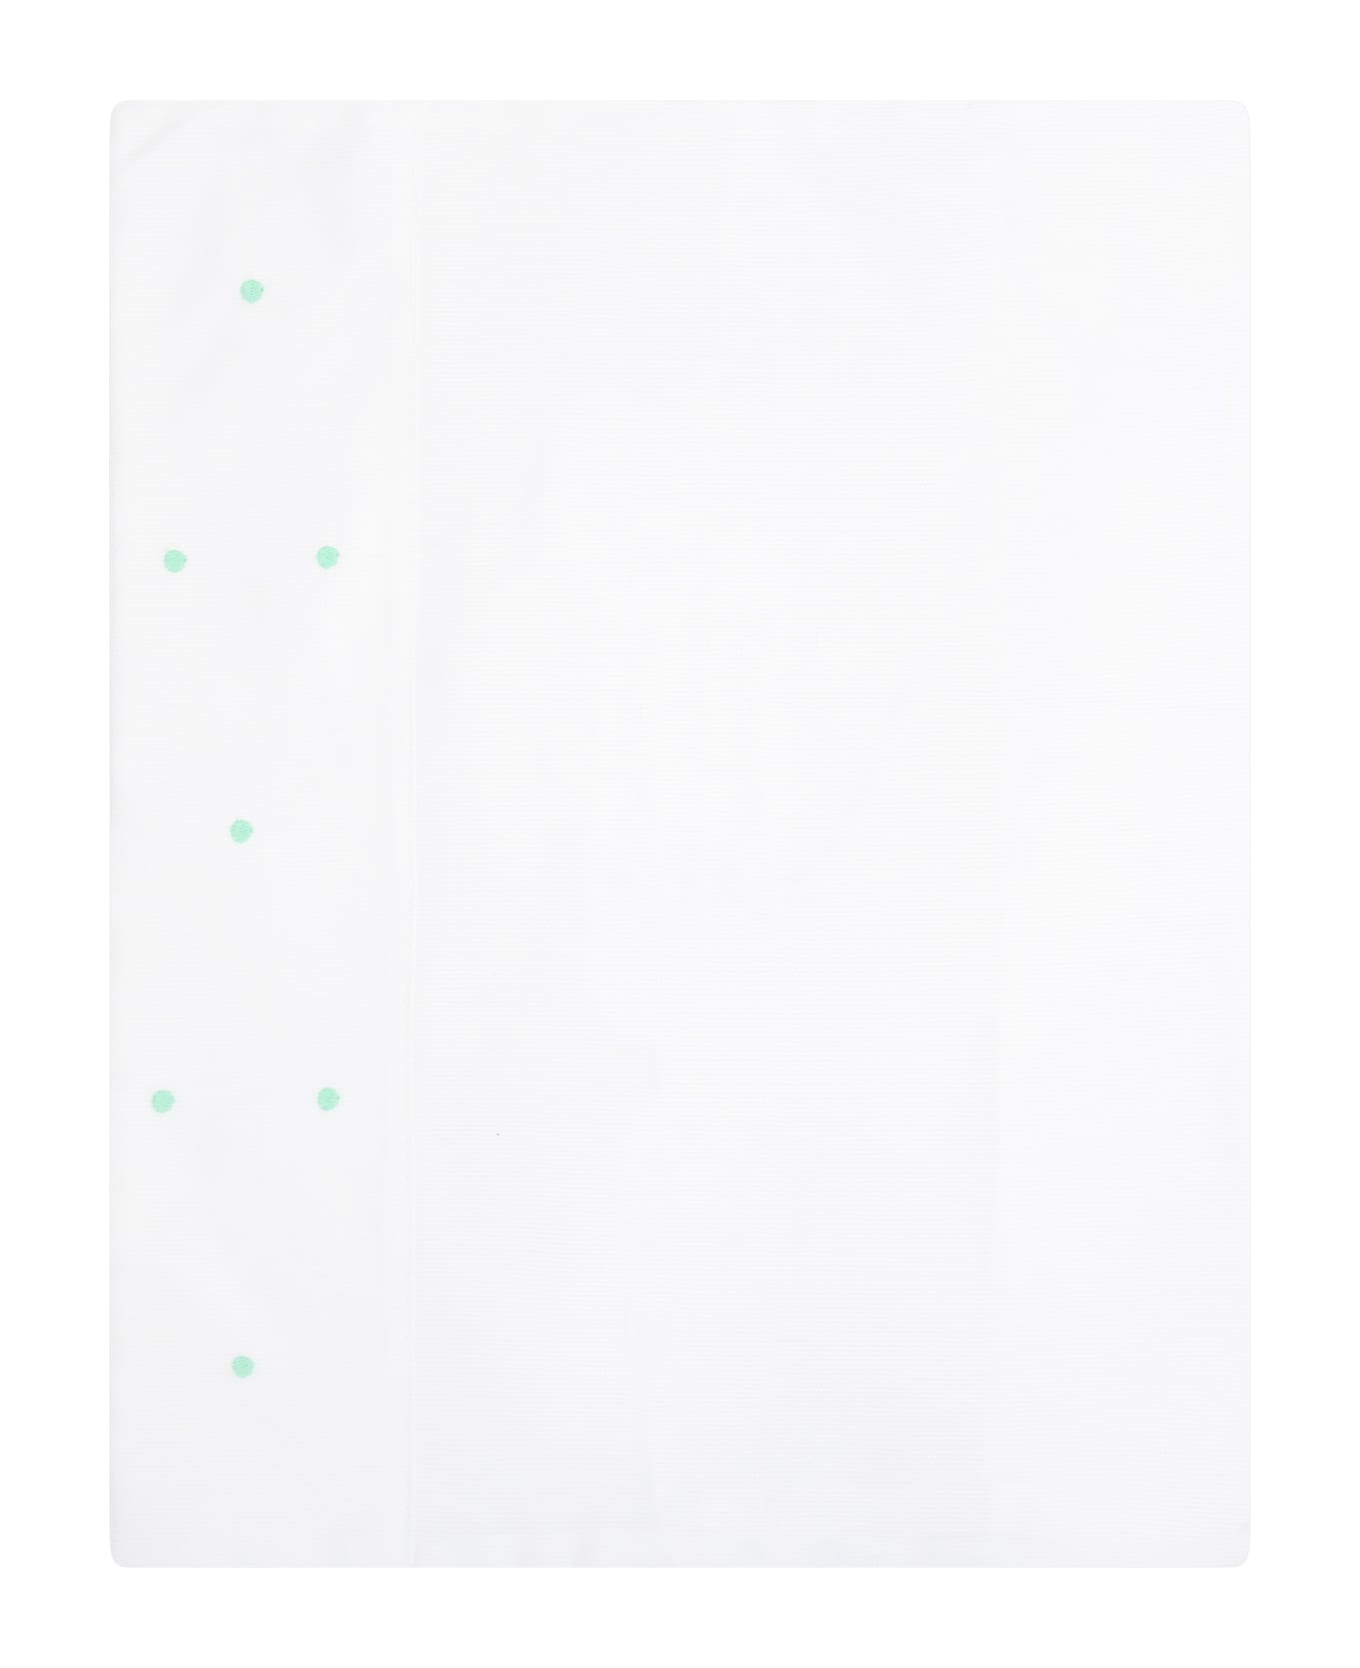 Little Bear White Sheet For Baby Kids With Green Polka Dots - White